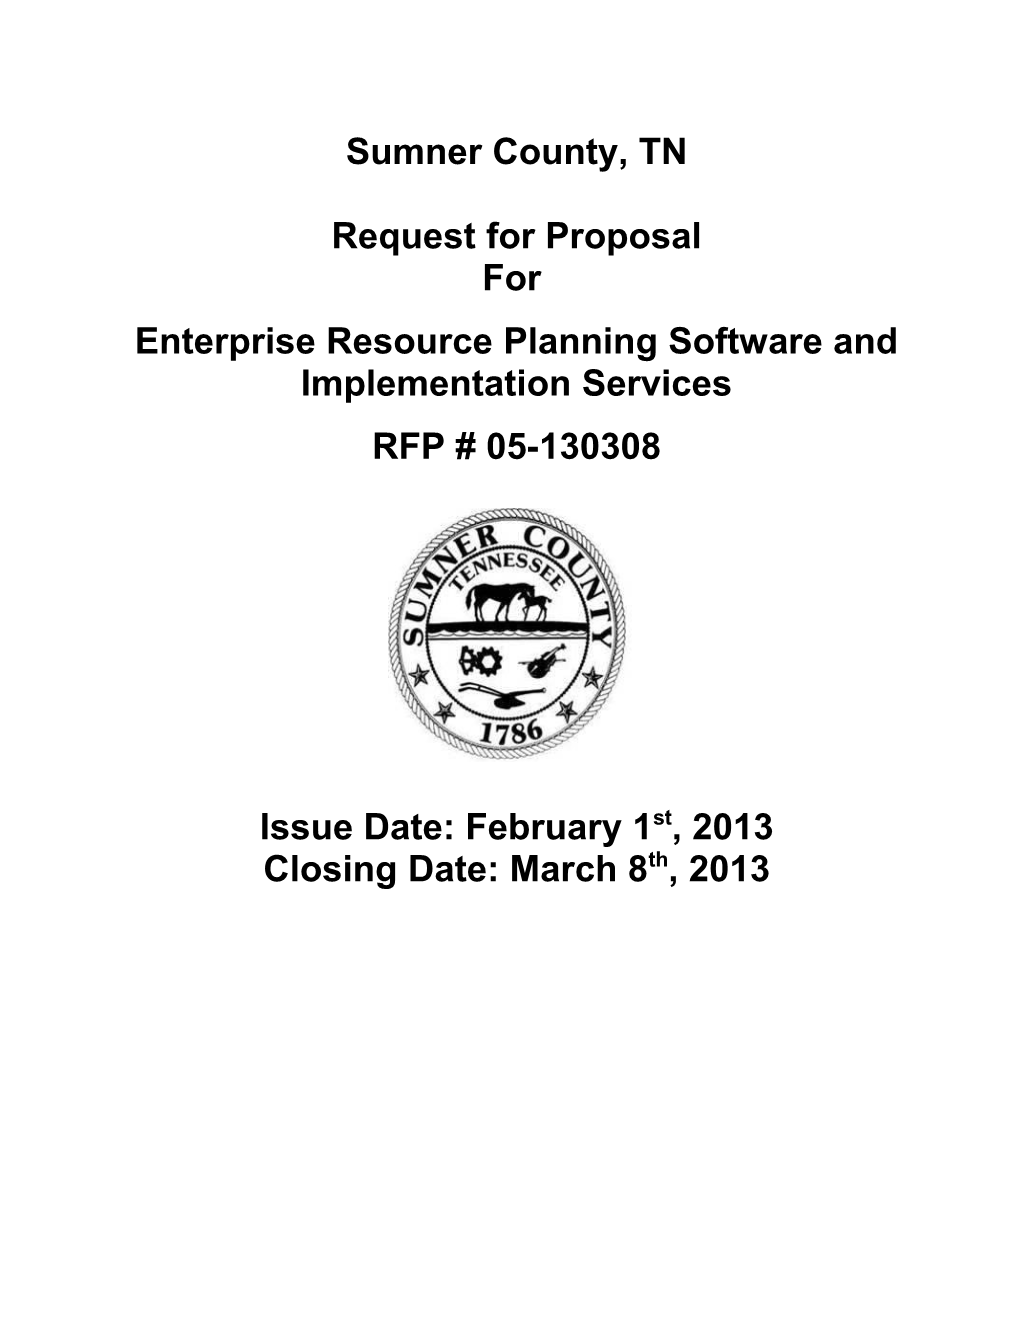 Enterprise Resource Planning Software and Implementation Services